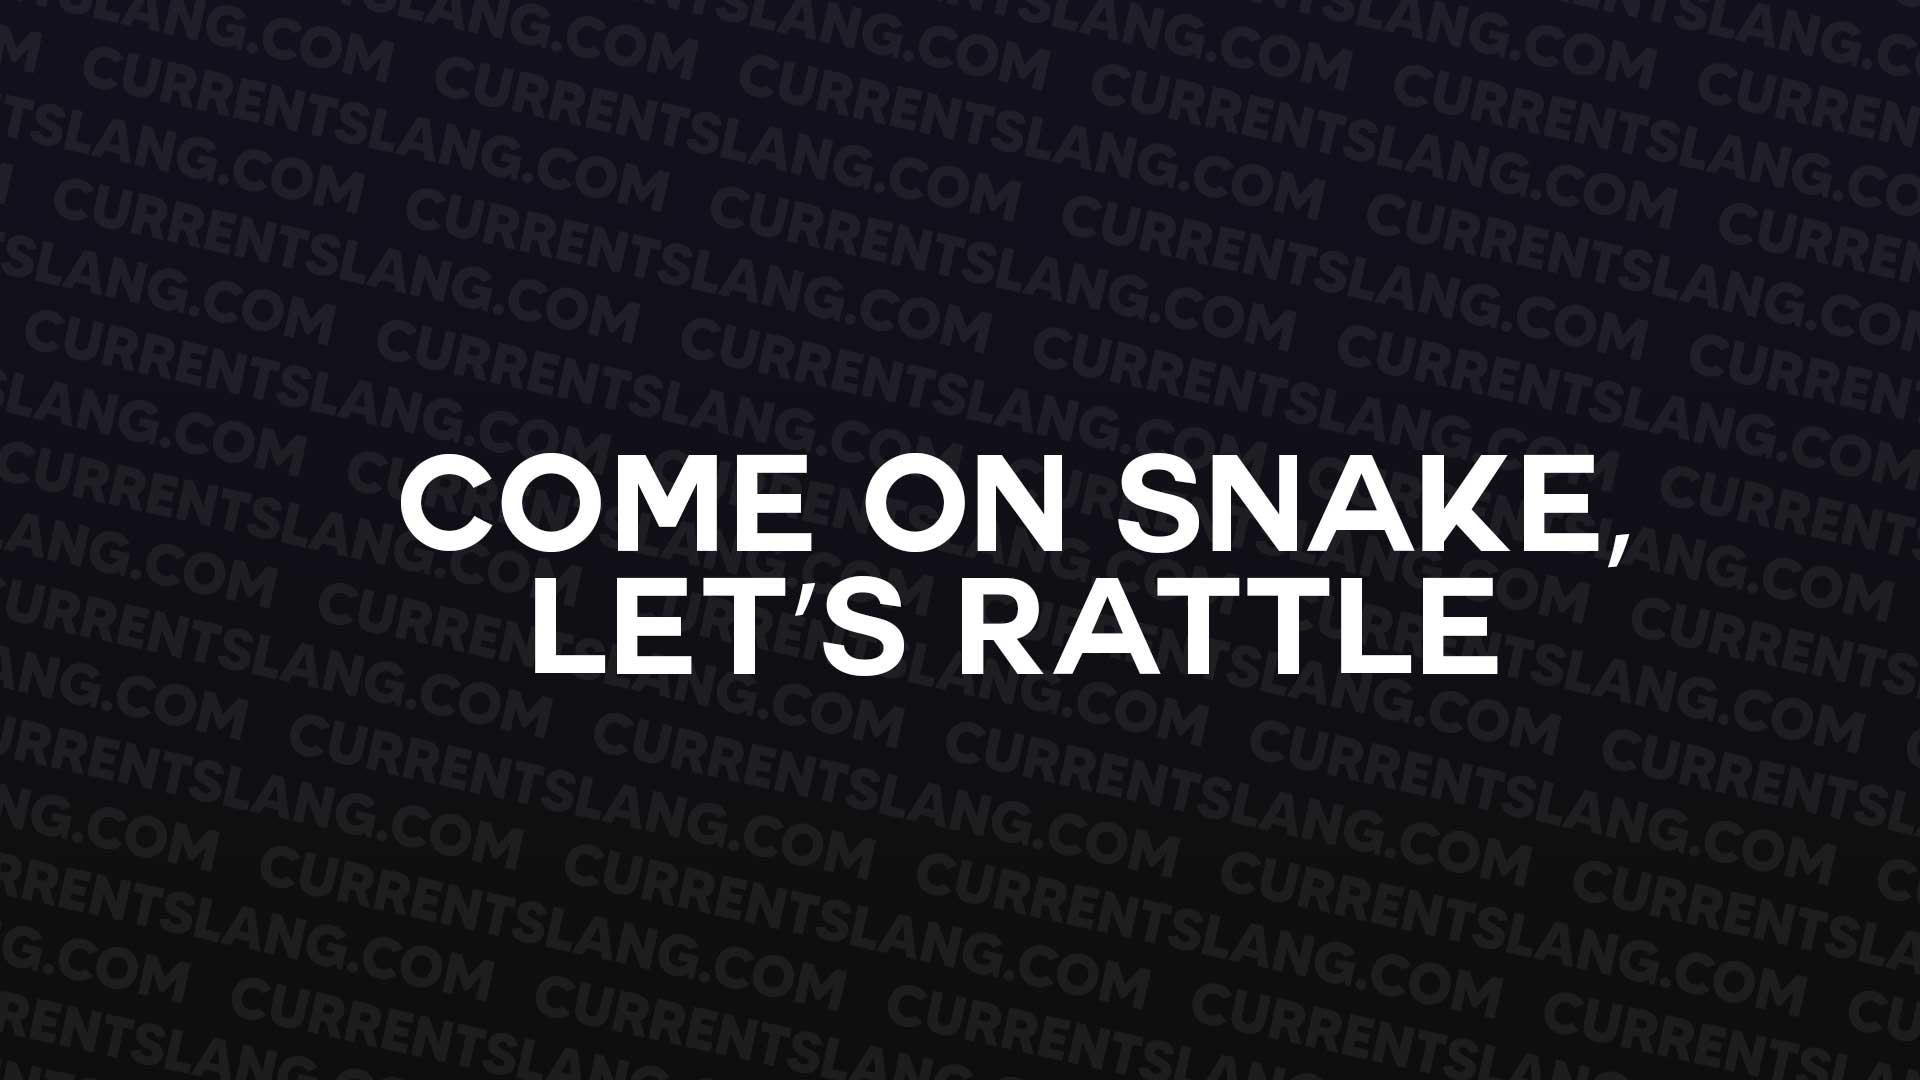 title image for Come on snake, let’s rattle